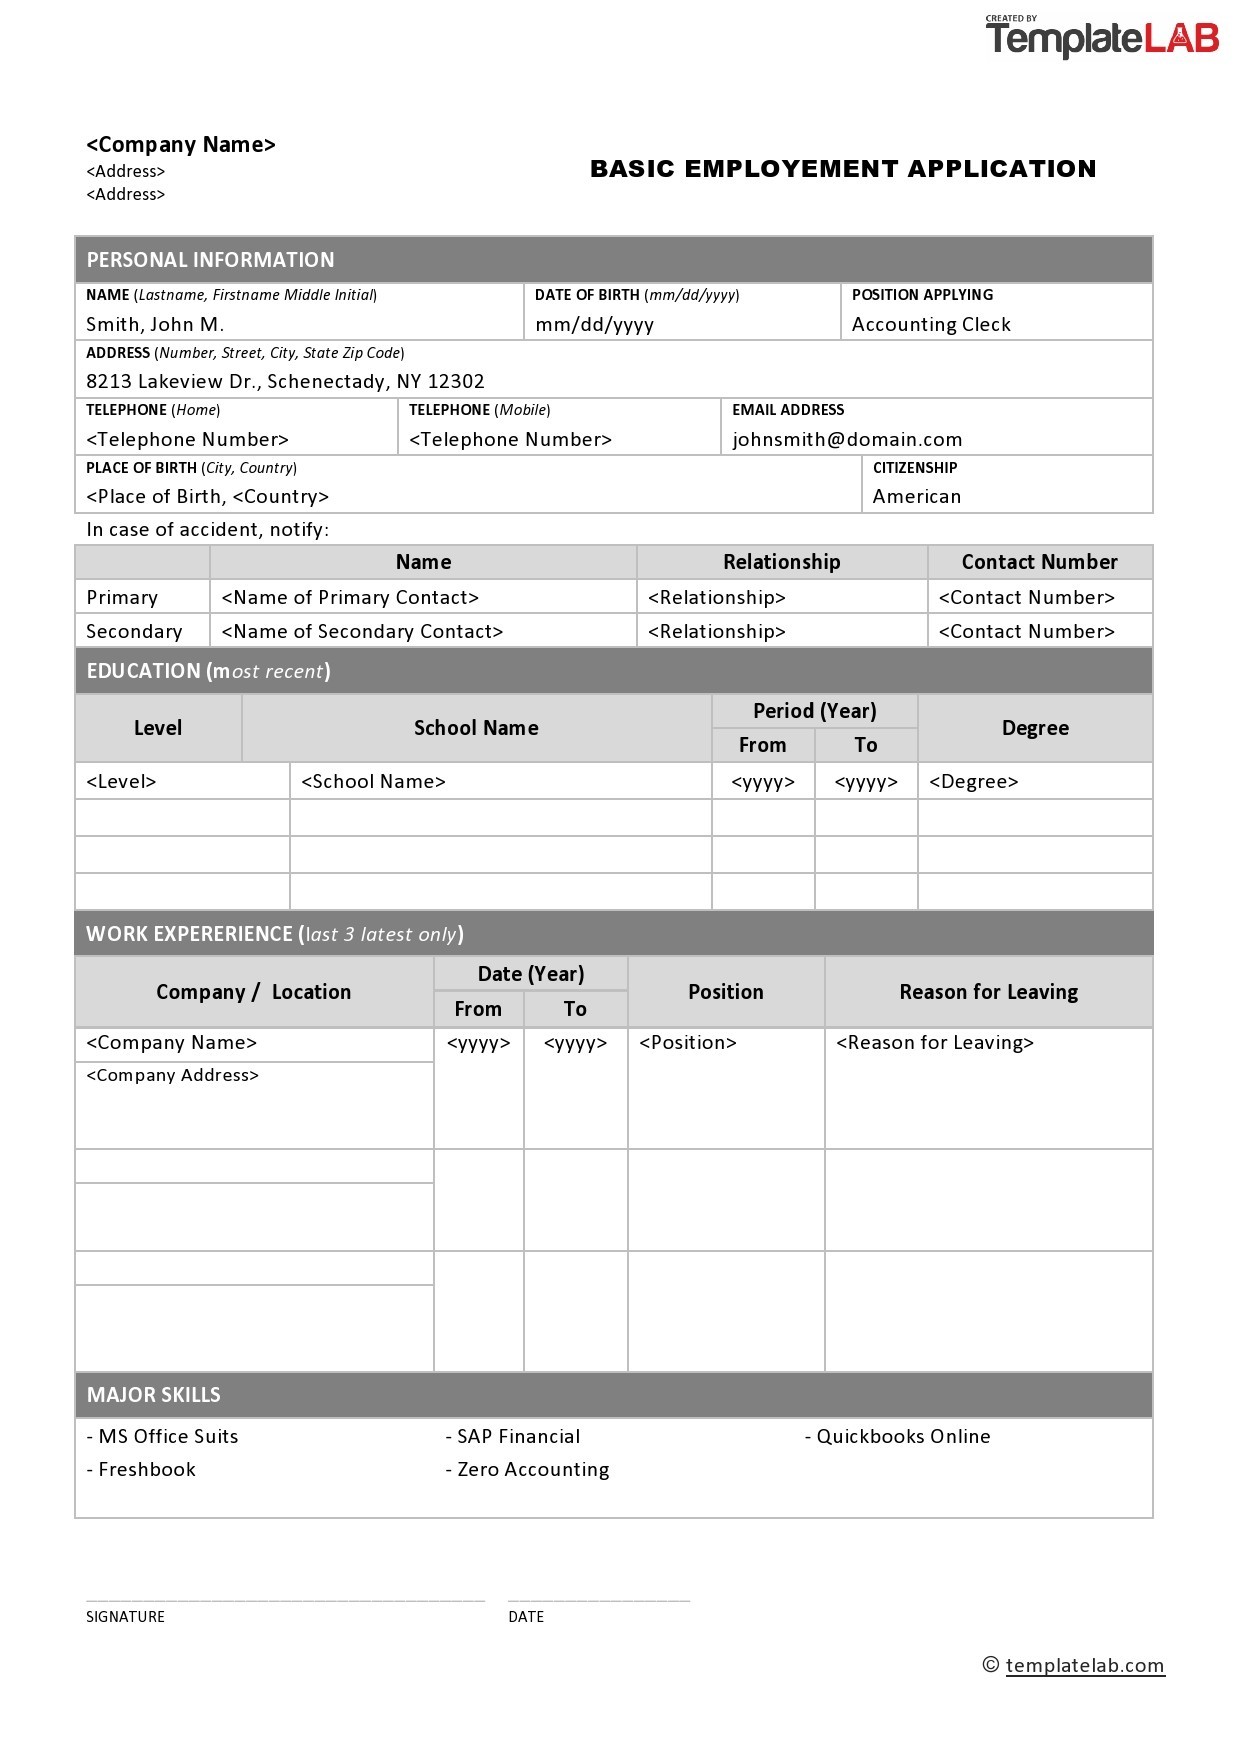 Application form template free download download free music for videos